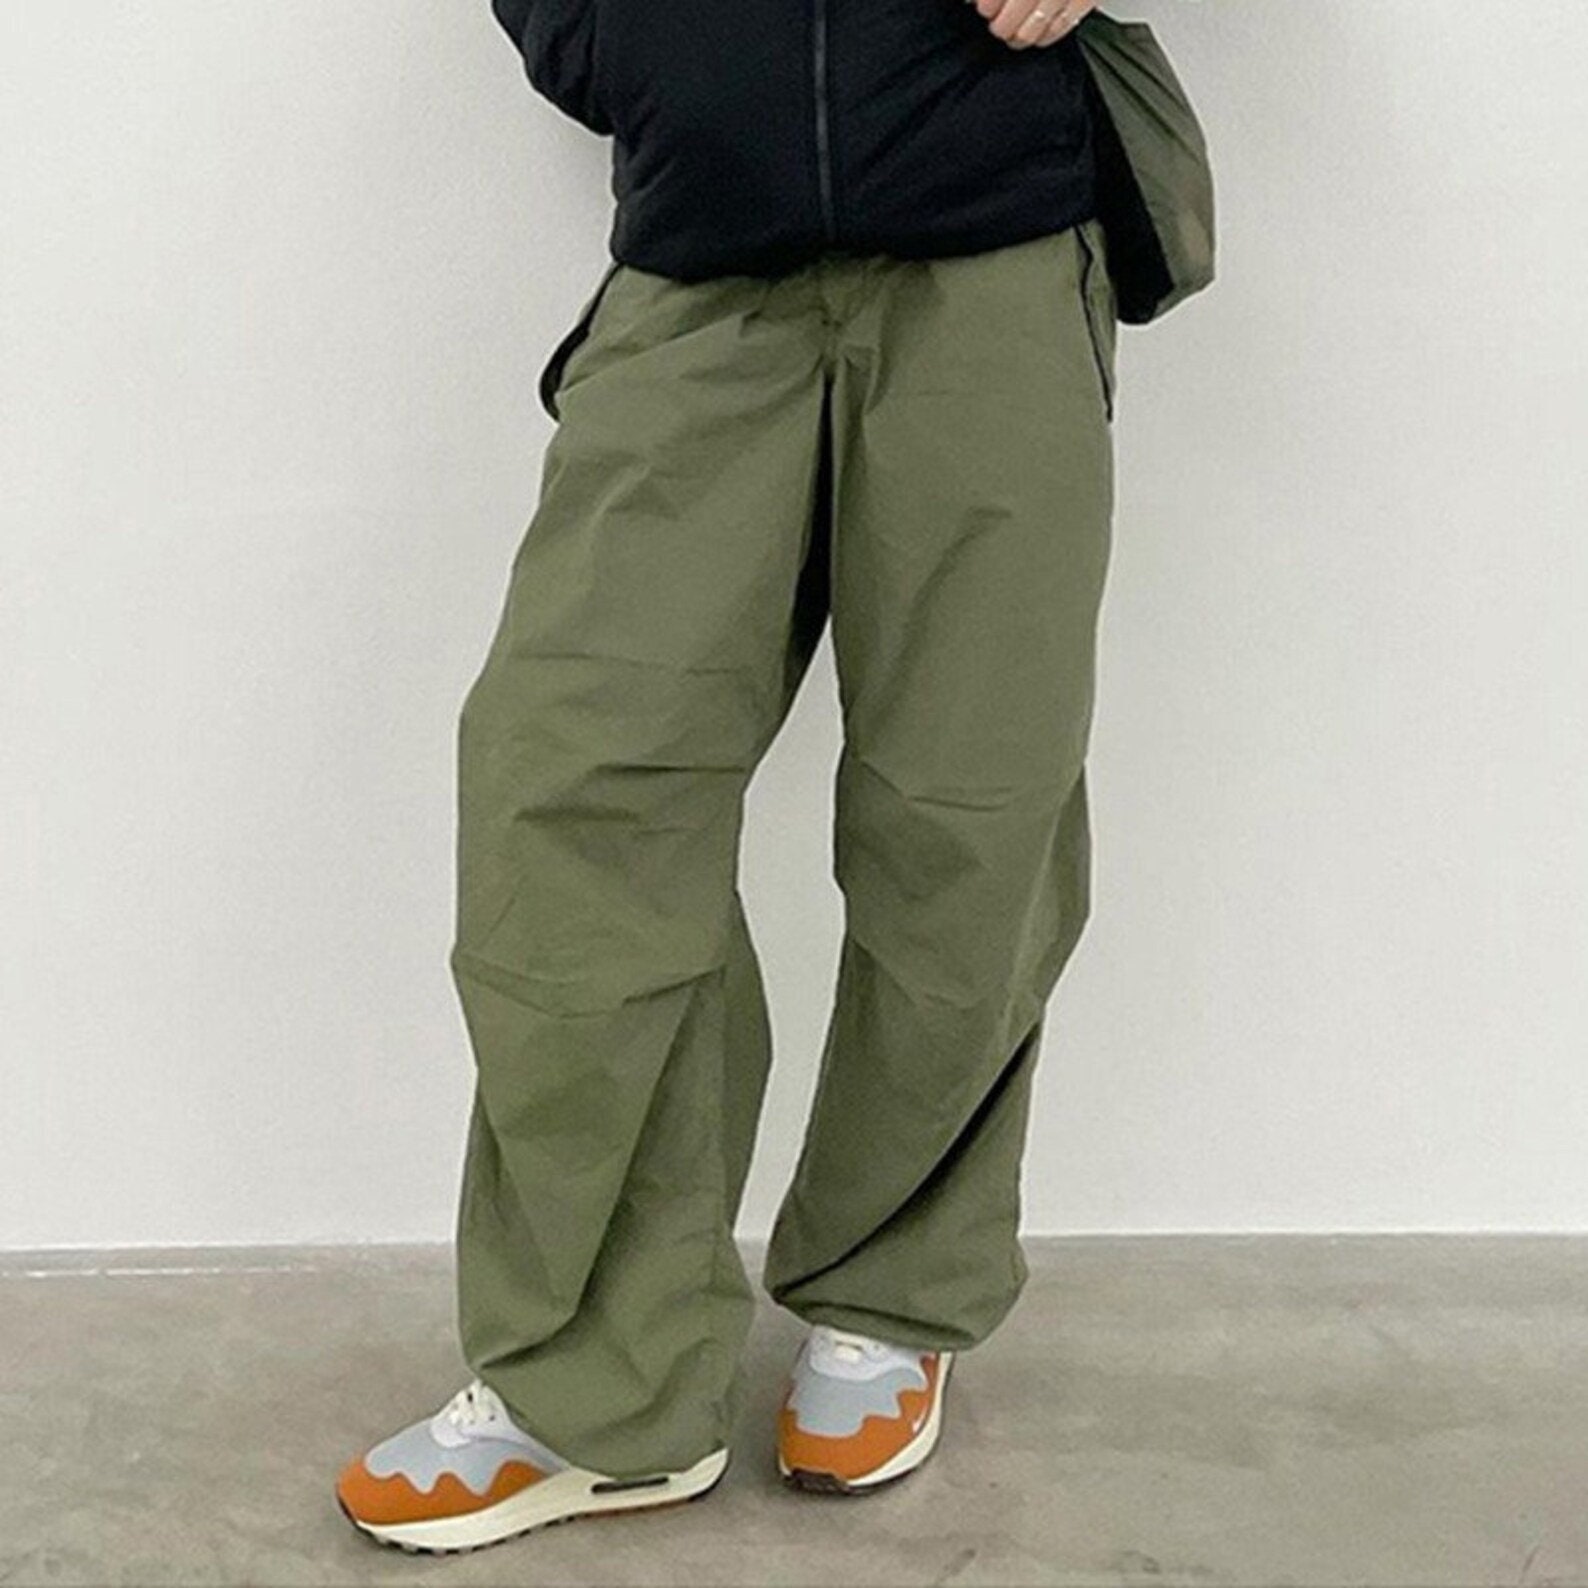 Y2k Oversized Cargo Pants Low Waisted Drawstring Trousers